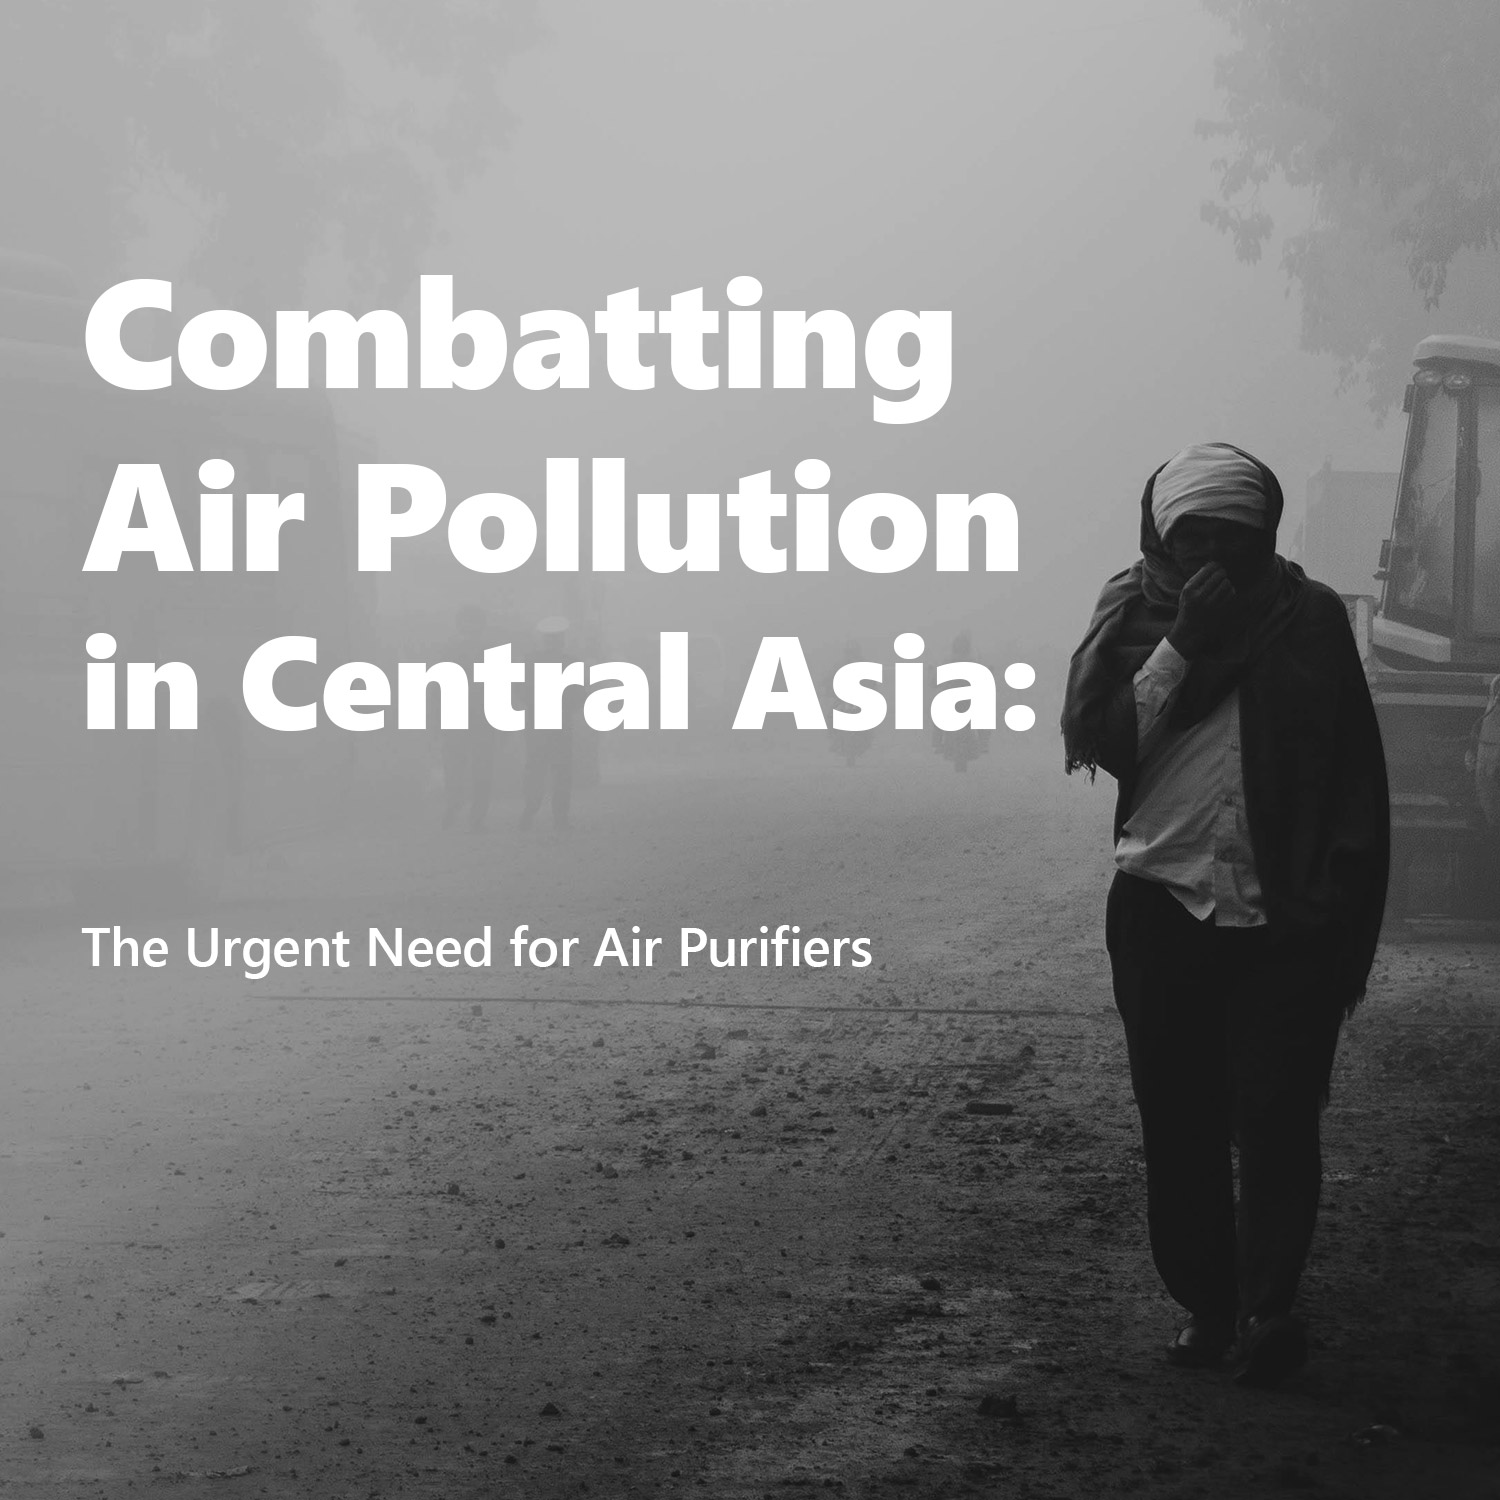 Combatting Air Pollution in Central Asia - The Urgent Need for Air Purifiers - Why Air Purifiers Matter in Kazakhstan, Uzbekistan, Kyrgyzstan